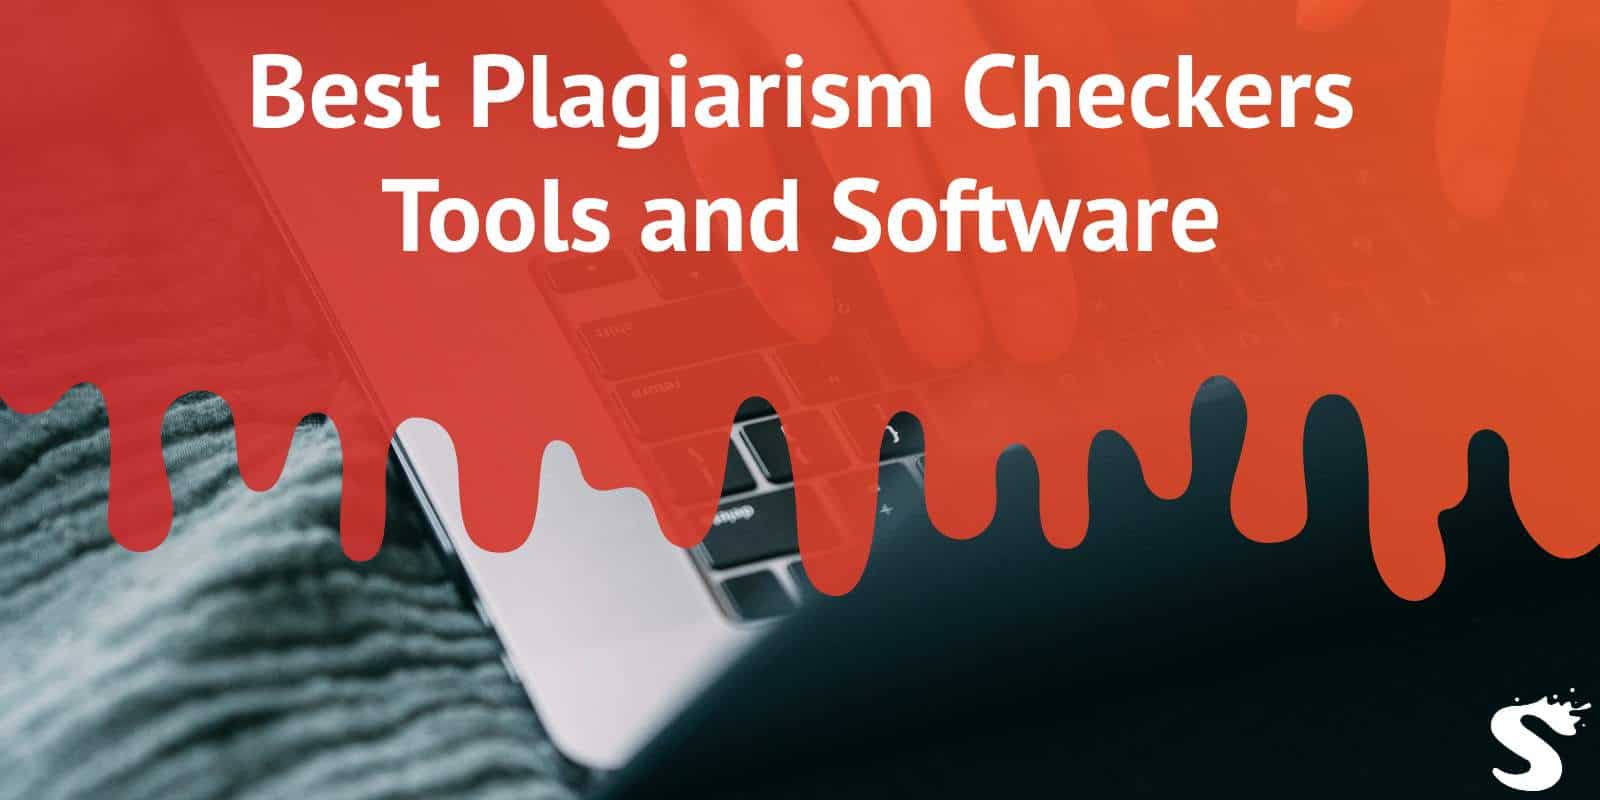 Best Plagiarism Checkers Tools and Software